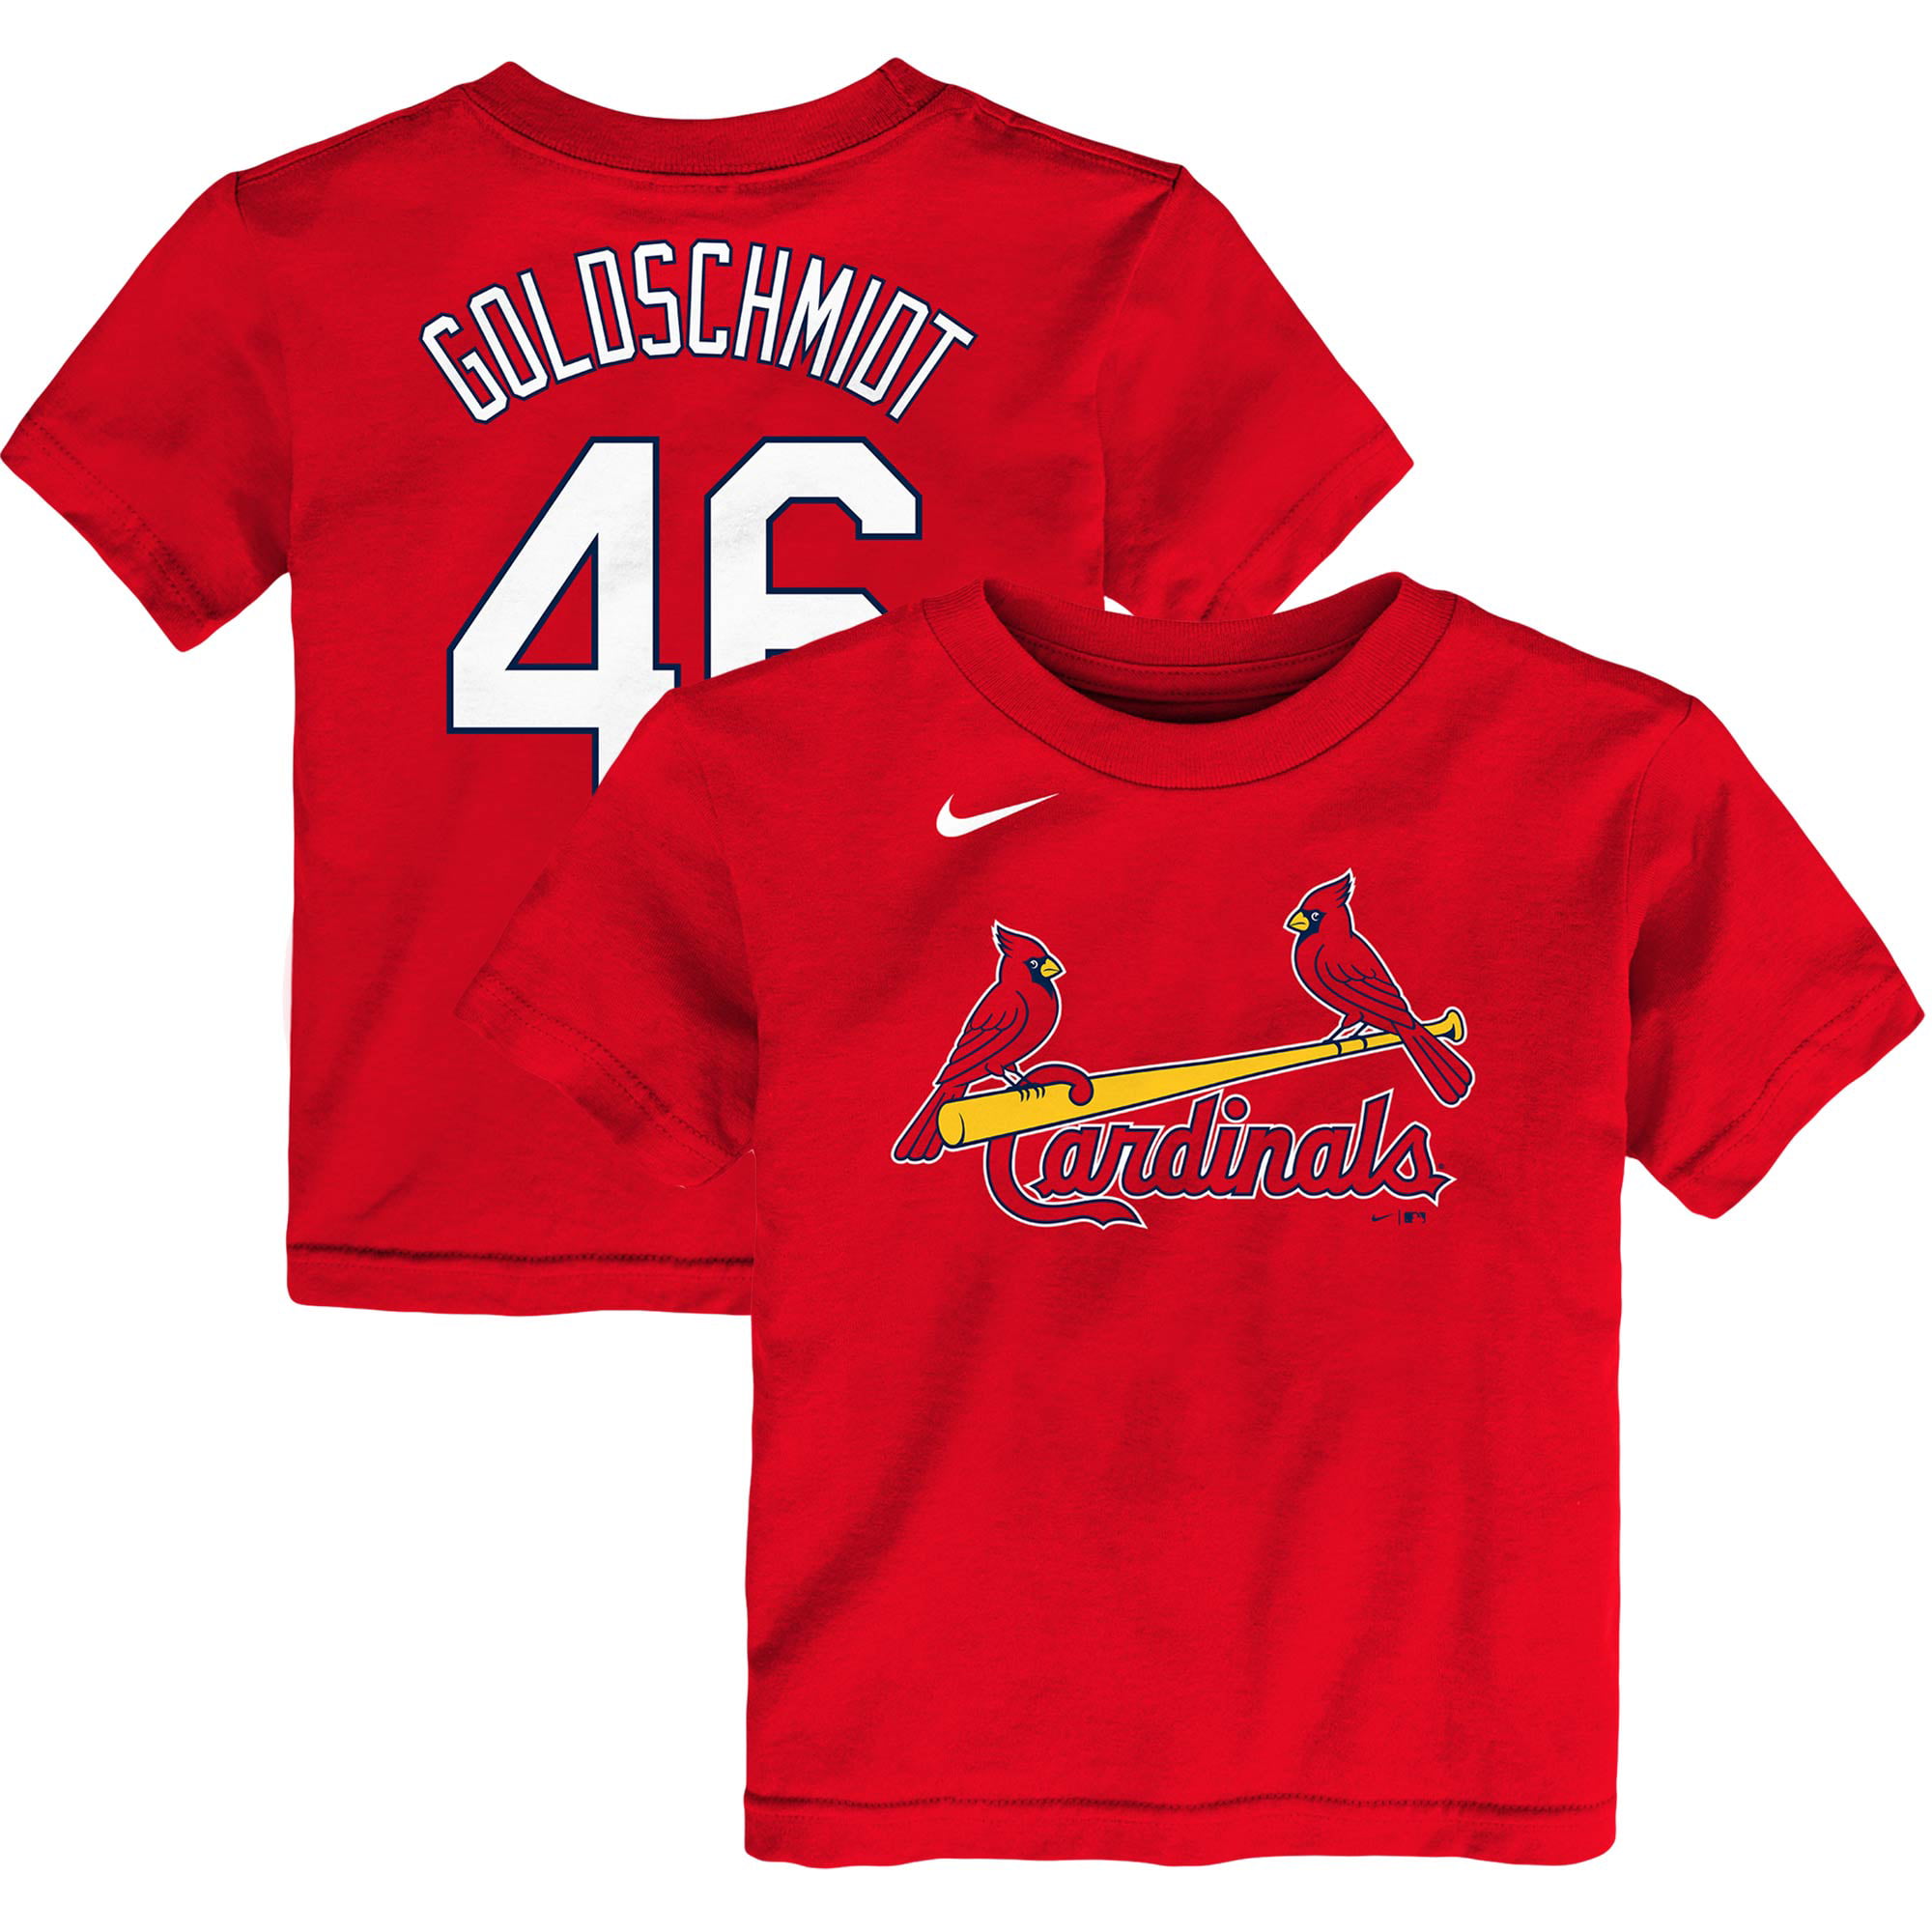 Toddler Nike Paul Goldschmidt Red St. Louis Cardinals Player Name & Number  T-Shirt 